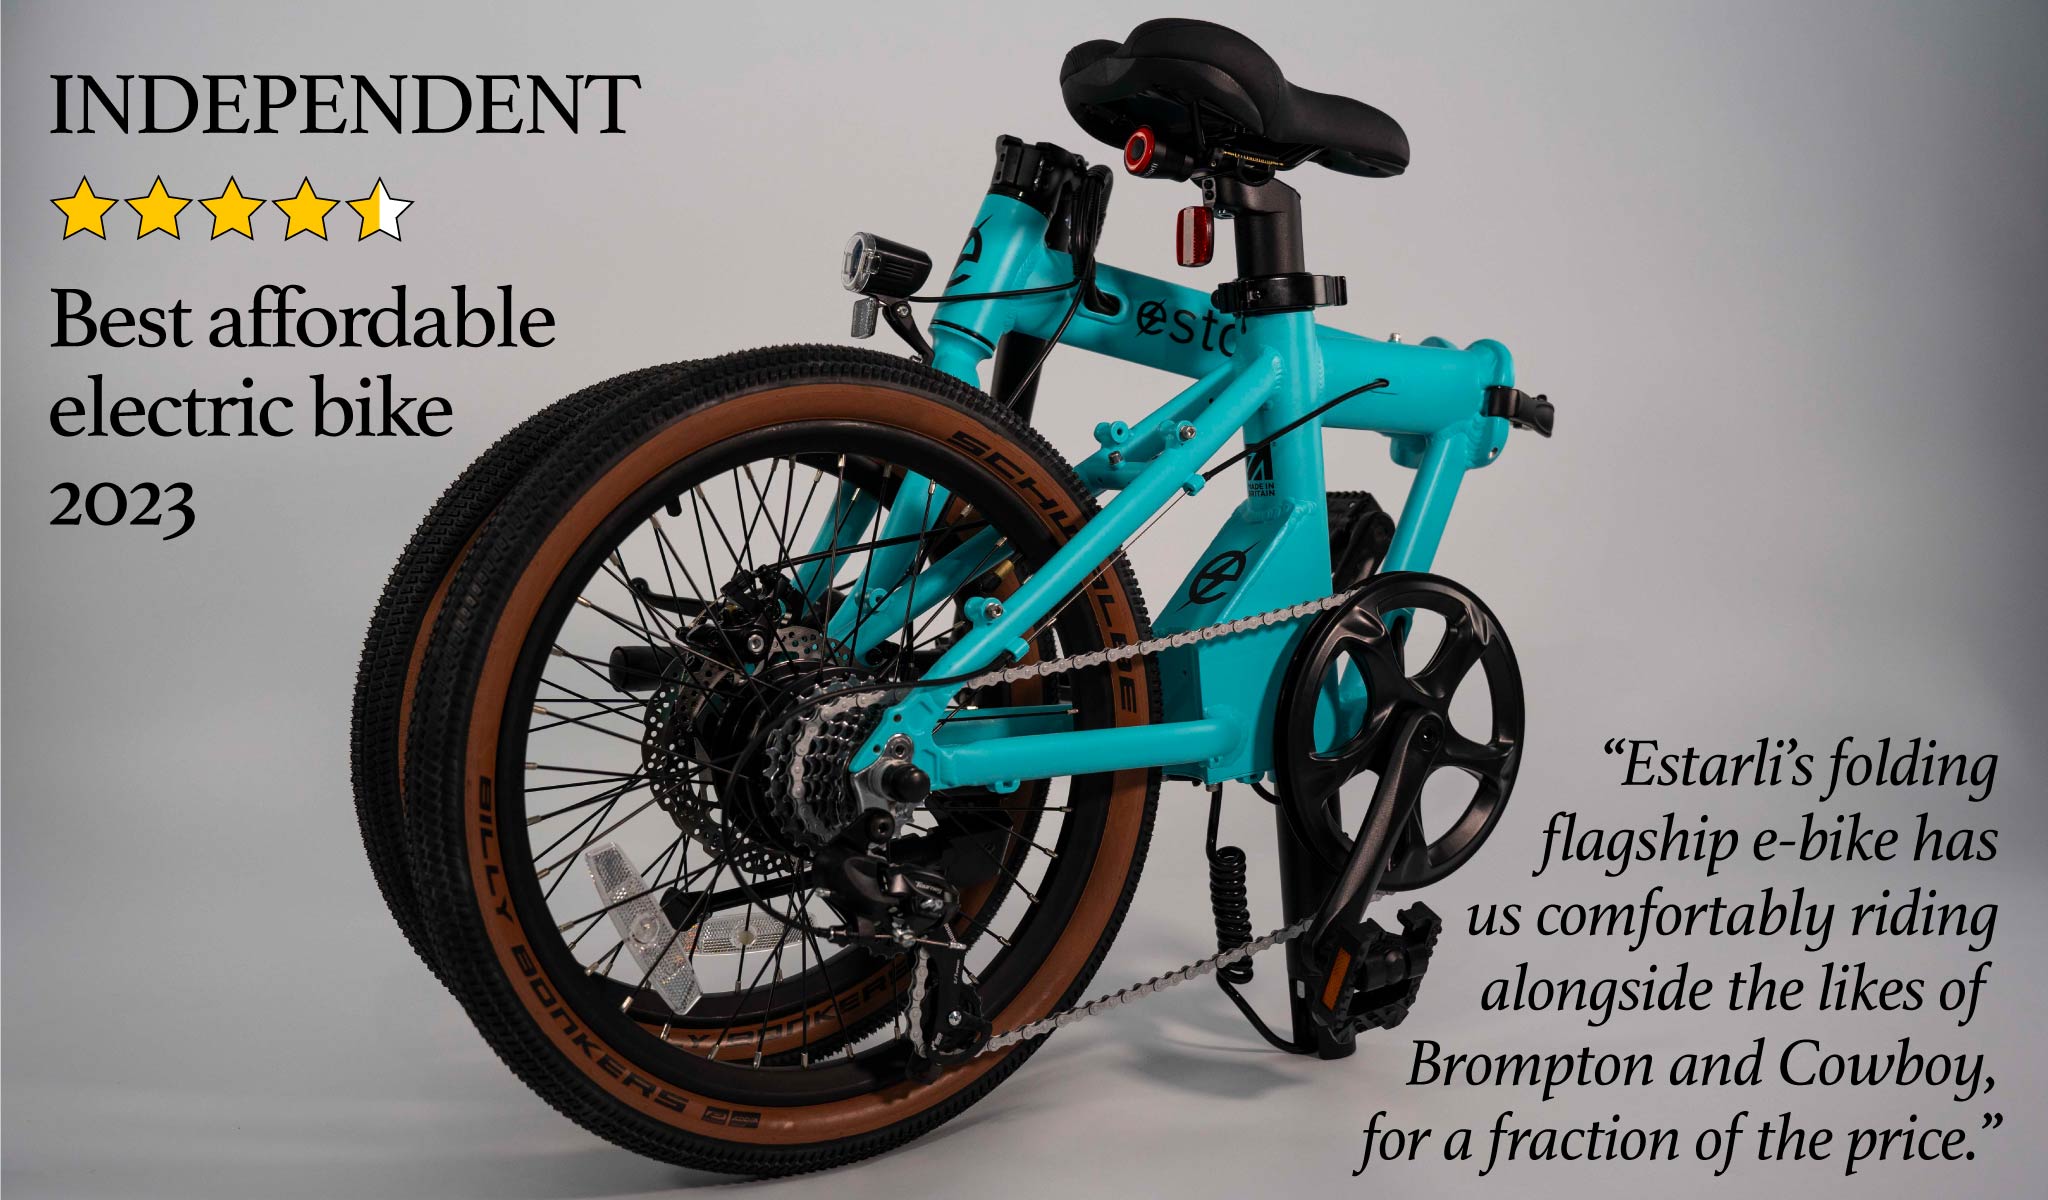 The Estarli e20.7 voted "Best affordable electric bike 2023" by The Independent newspaper. They said, "Estarli's folding flagship e-bike has us comfortably riding alongside the likes of Brompton and Cowboy for a fraction of the price."